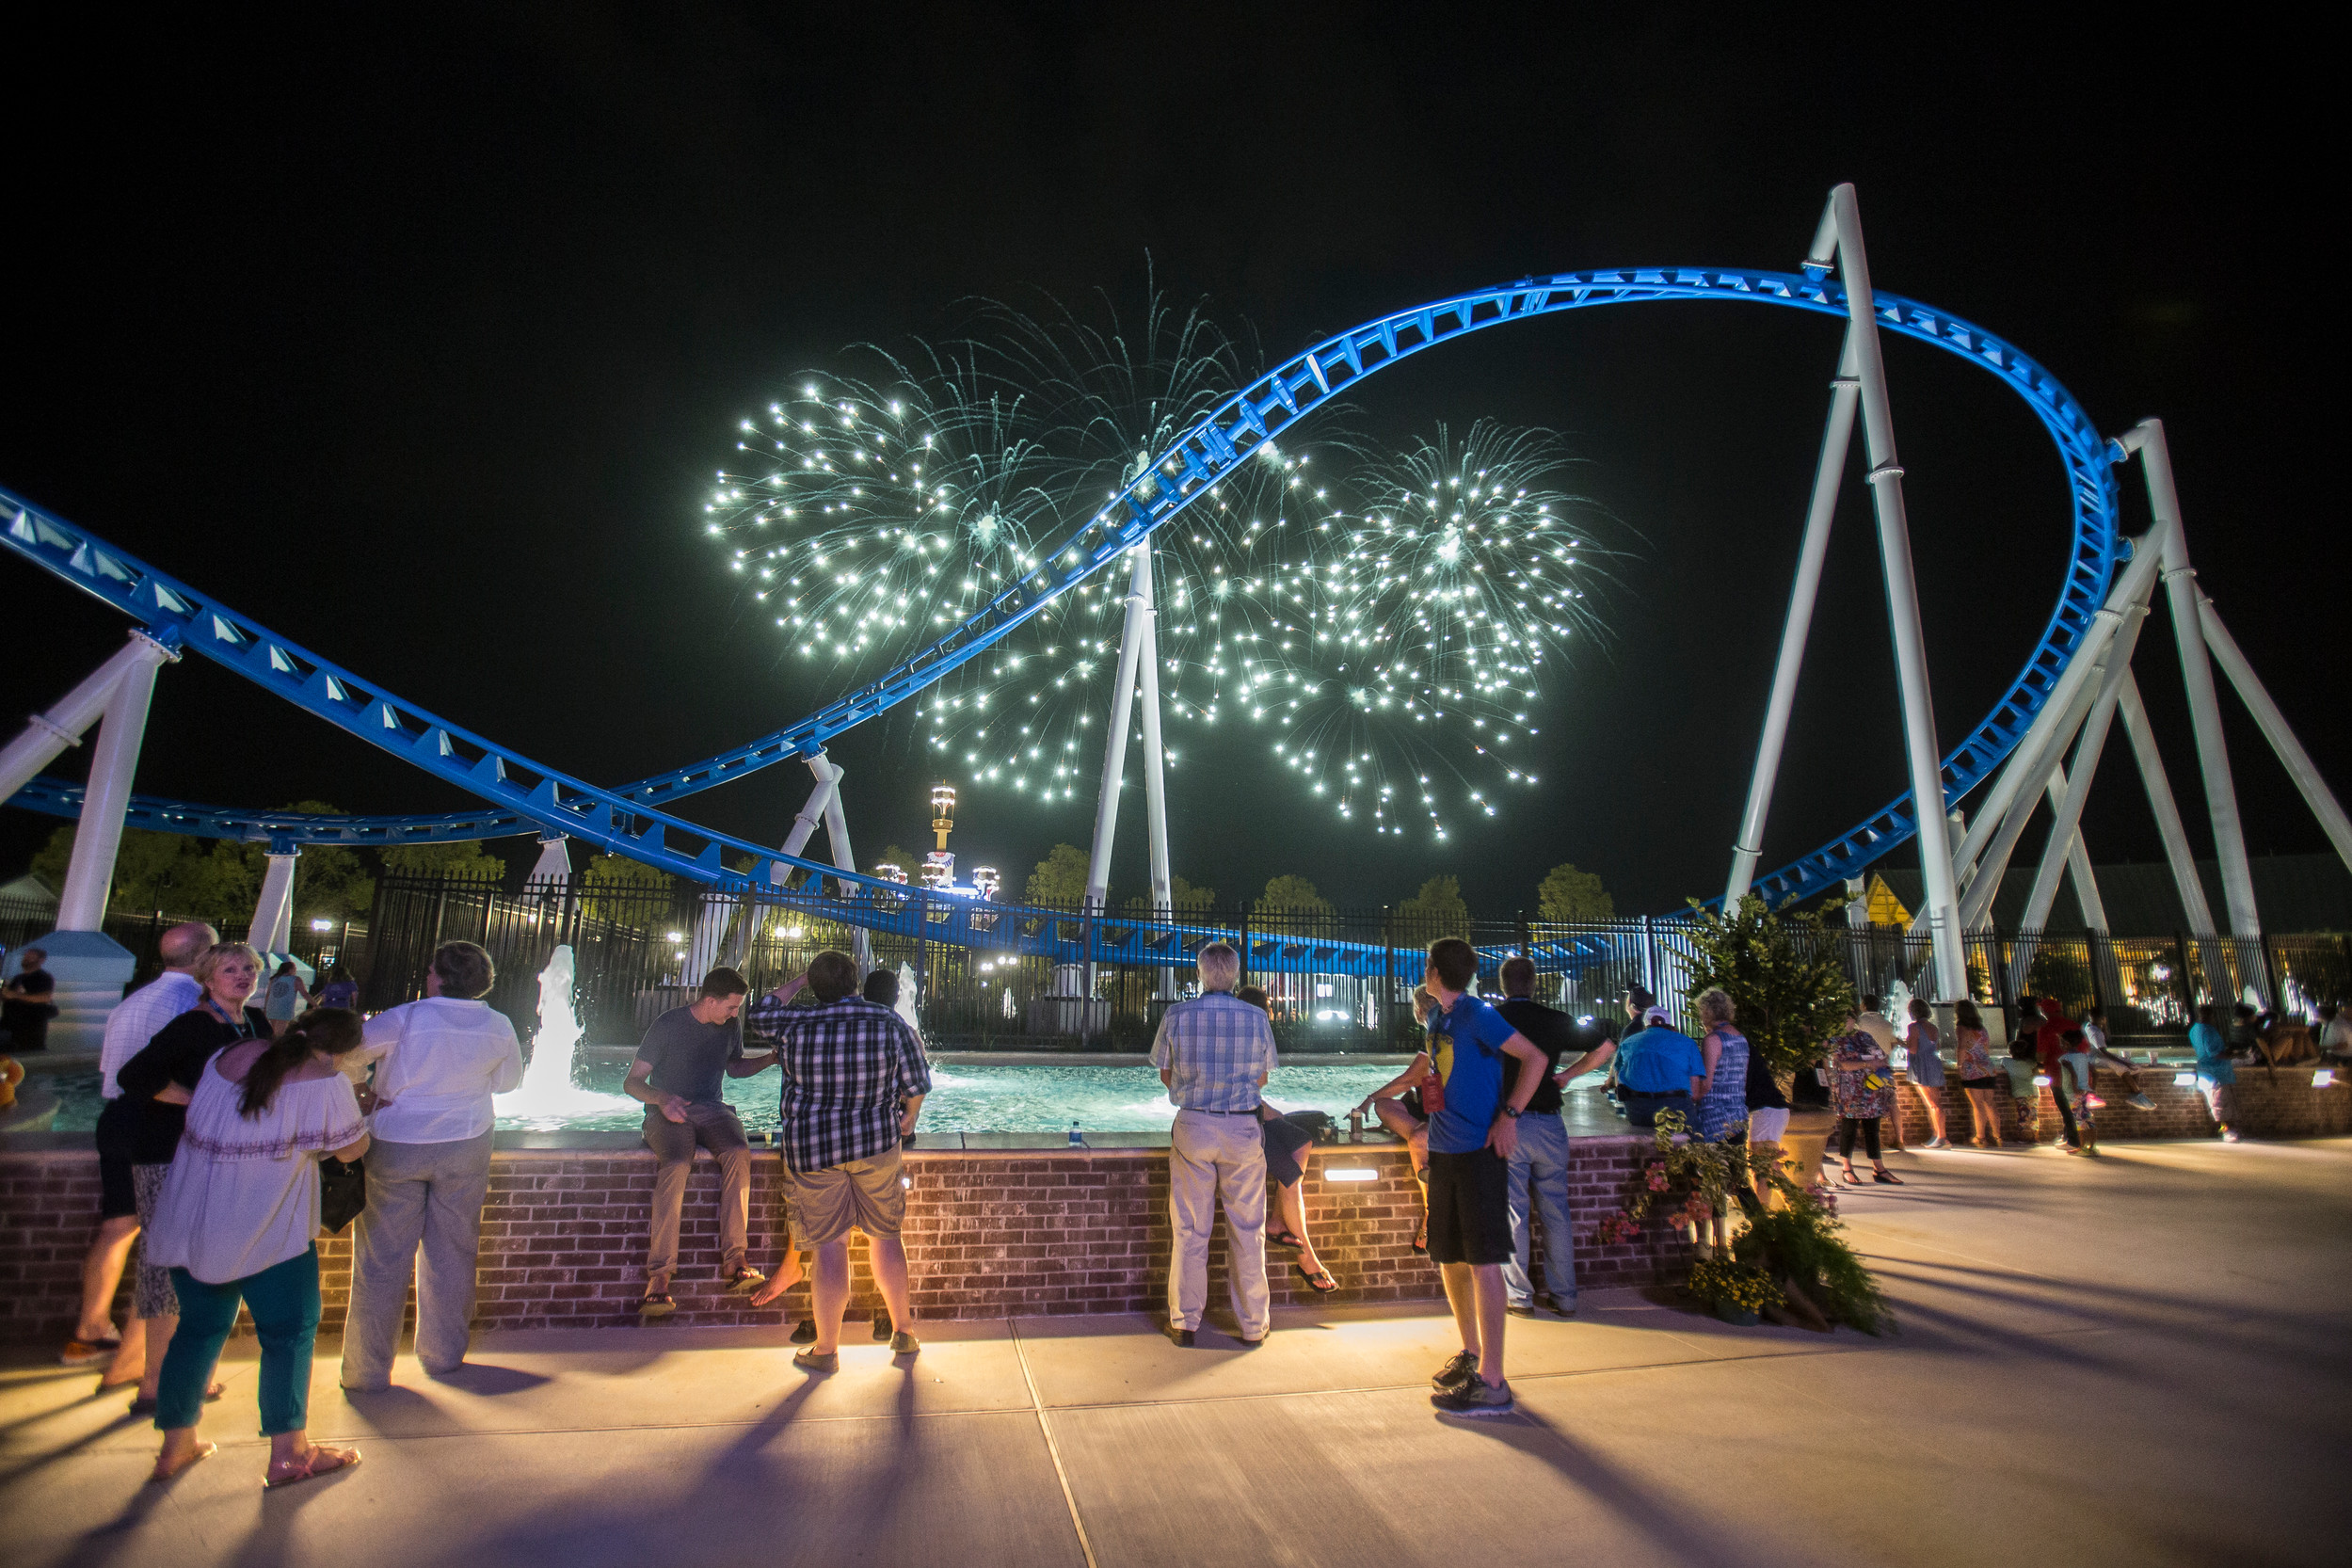 This week, HomeToGo released its 2023 Theme Park Index highlighting the best and most affordable theme parks in North America. This is the second year in a row that Tropic Falls at OWA has been in the top five of the most affordable theme parks. In 2022, it topped the list.